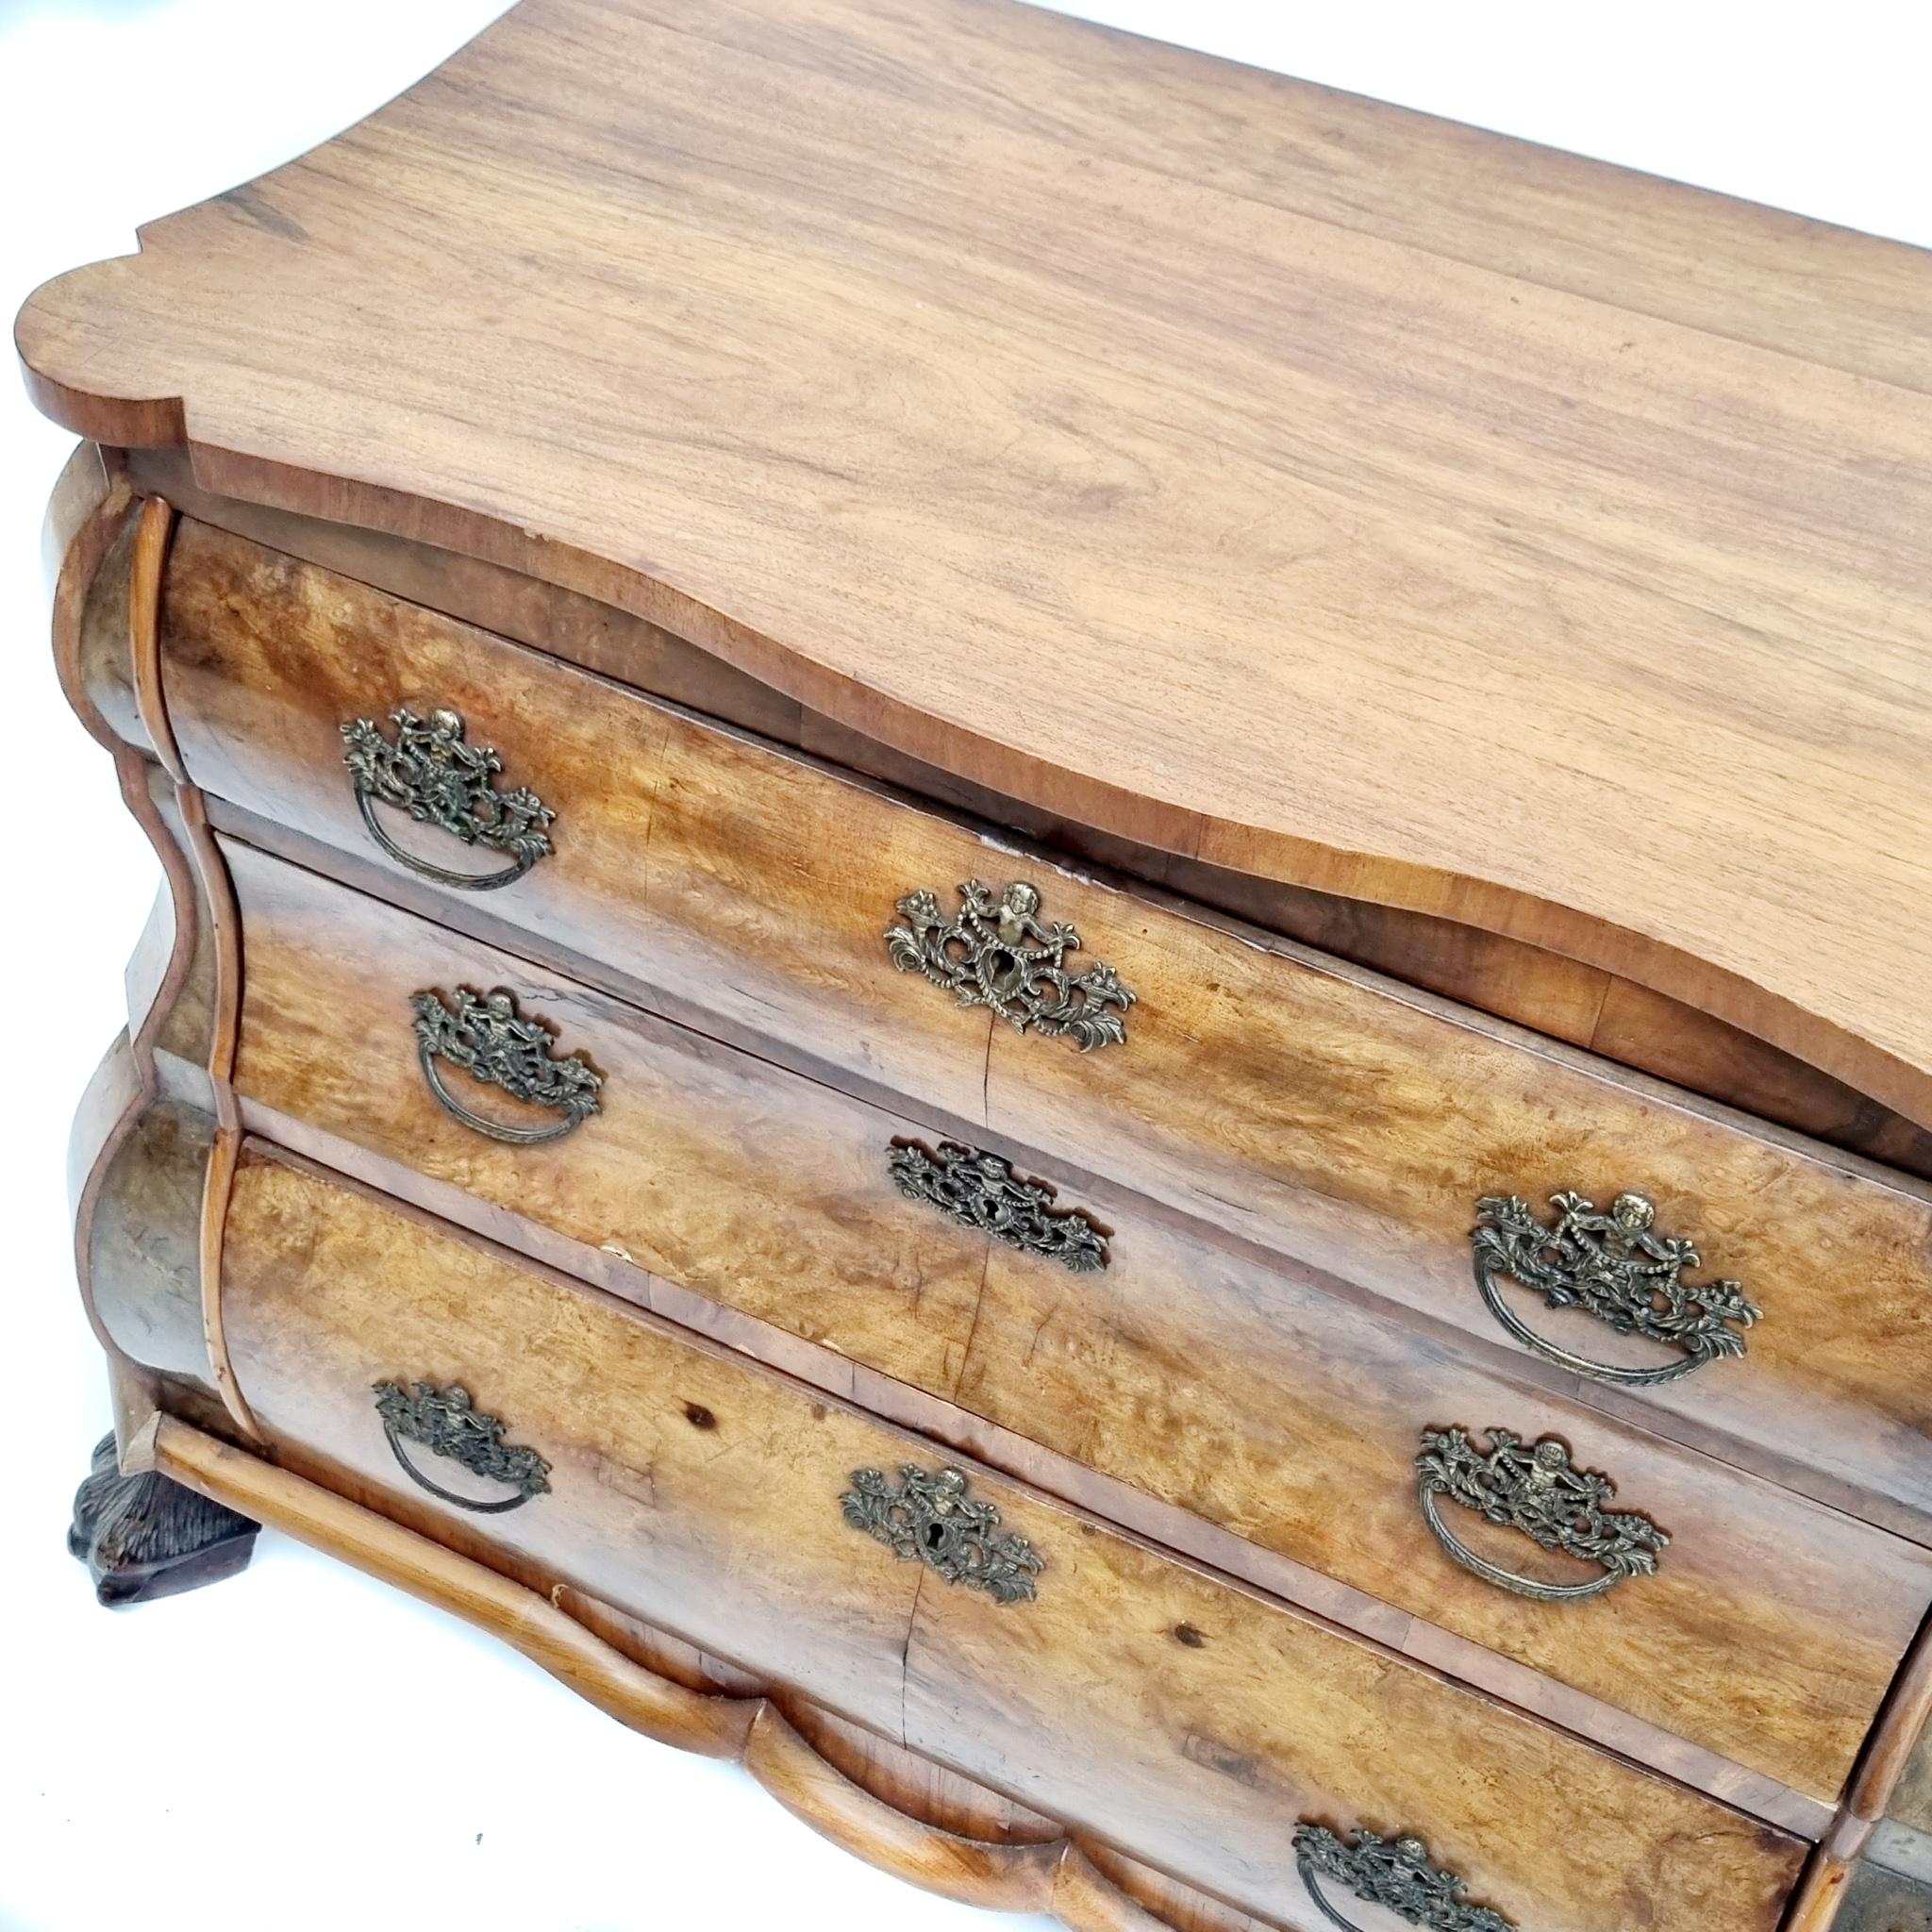 Dutch chest of 3 drawers with claw feet from the 19th century in walnut burl veneer. Good example of a 19th century Dutch design bombe shaped commode. Fitted with 3 drawers and ornate handles. Standing on 4 lion paw carved feet. Overall good vintage